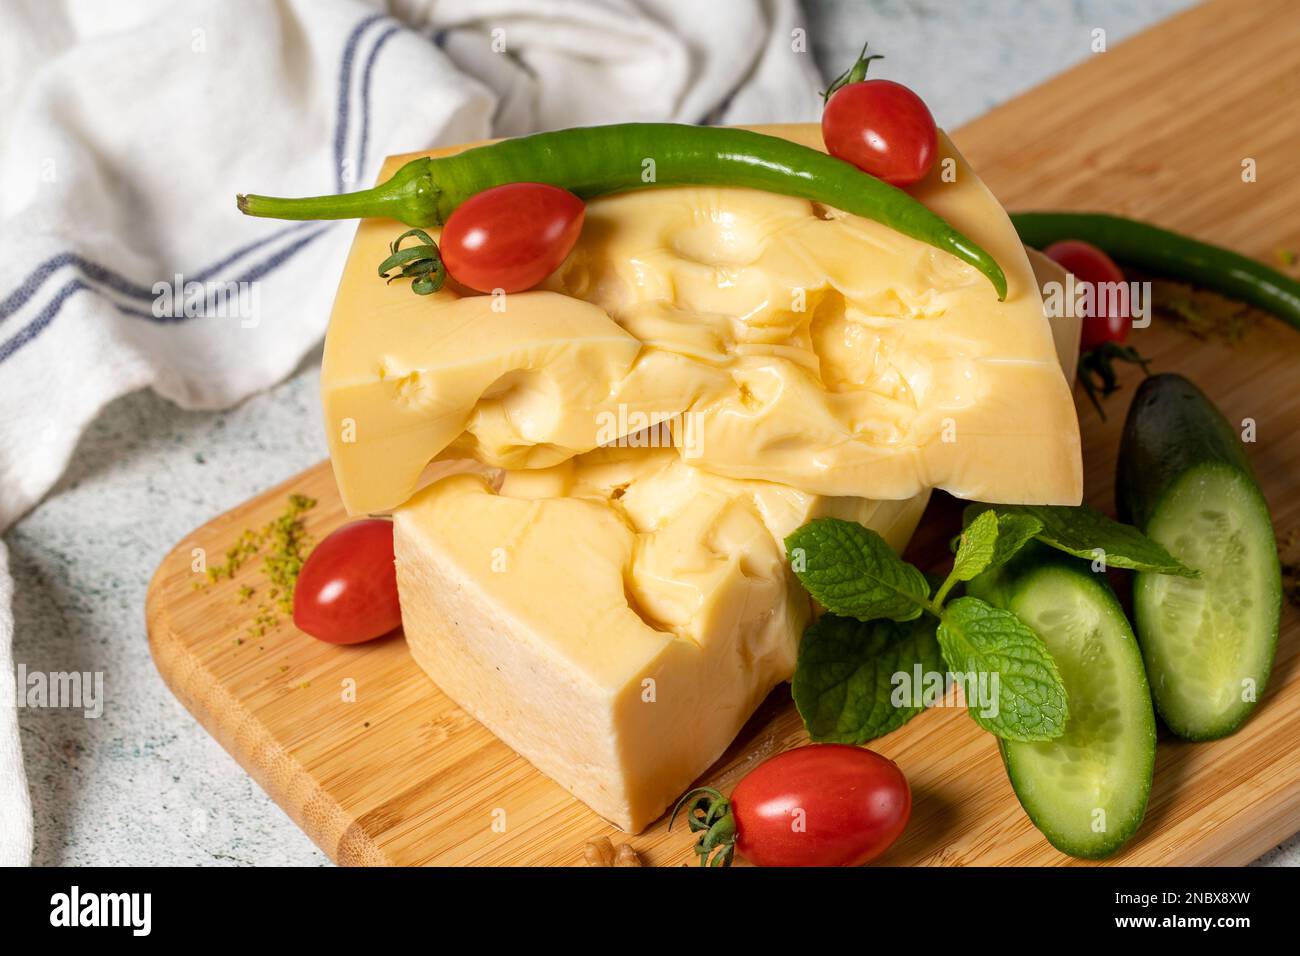 Gruyere cheese. Piece of Gruyere cheese on wooden cutting board. Cheese collection Stock Photo